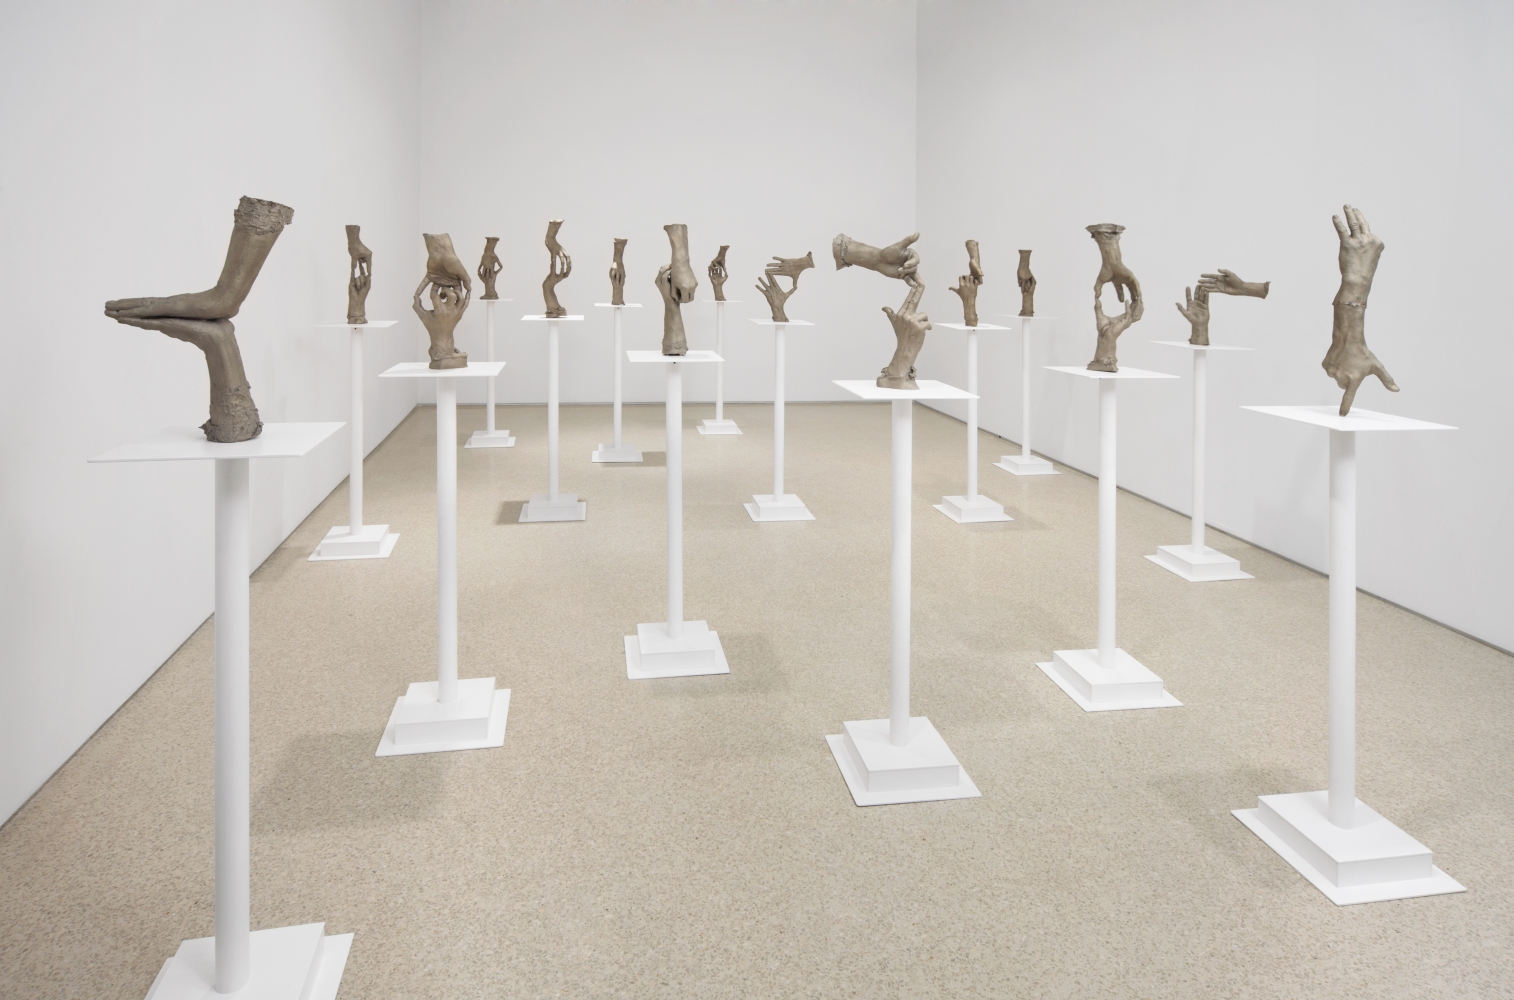 Bruce Nauman
Fifteen Pairs of Hands, 1996
white bronze with painted steel base
15 parts;&amp;nbsp;approximately 52 x 12 x 12 inches (132,1 x 30,5 x 30,5 cm) each
Artist Proof
SW 07162
Collection of Glenstone Museum, Potomac, MD